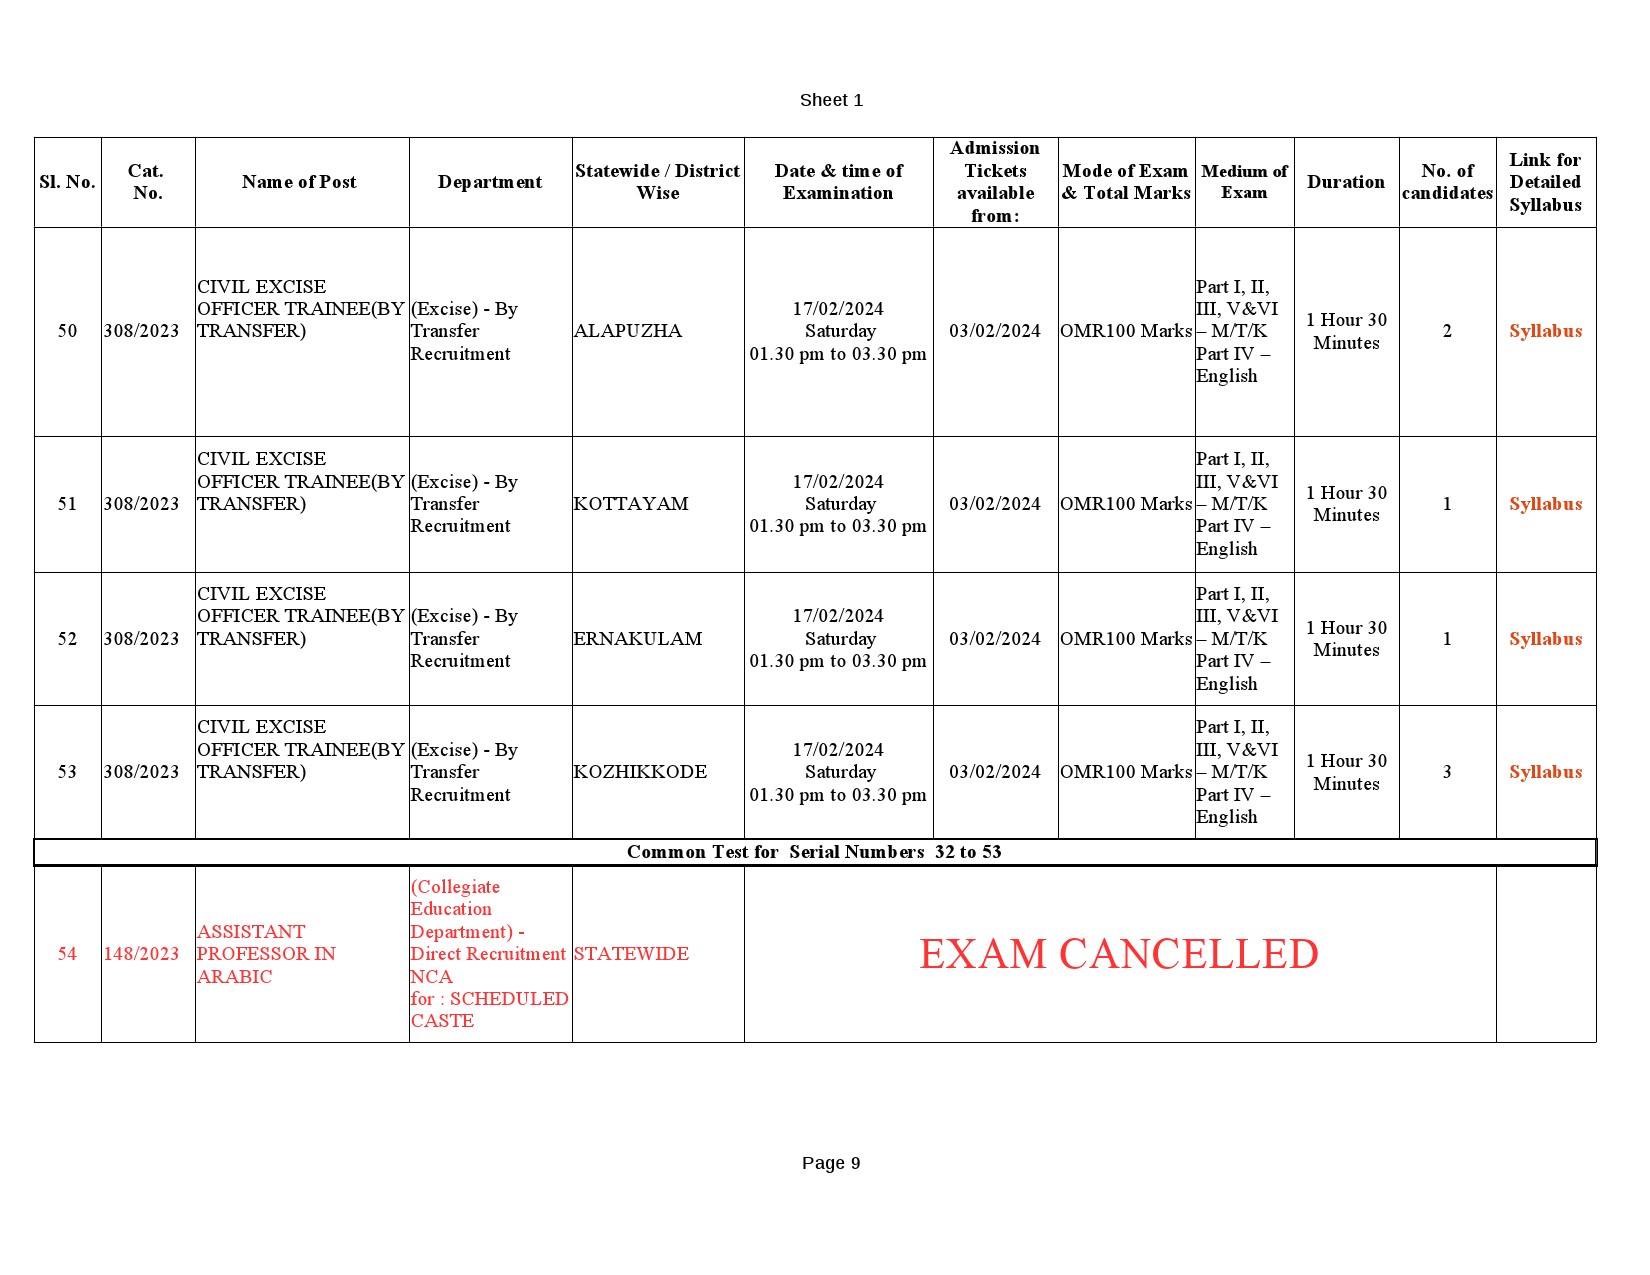 Examination Programme For The Month Of February 2024 - Notification Image 9